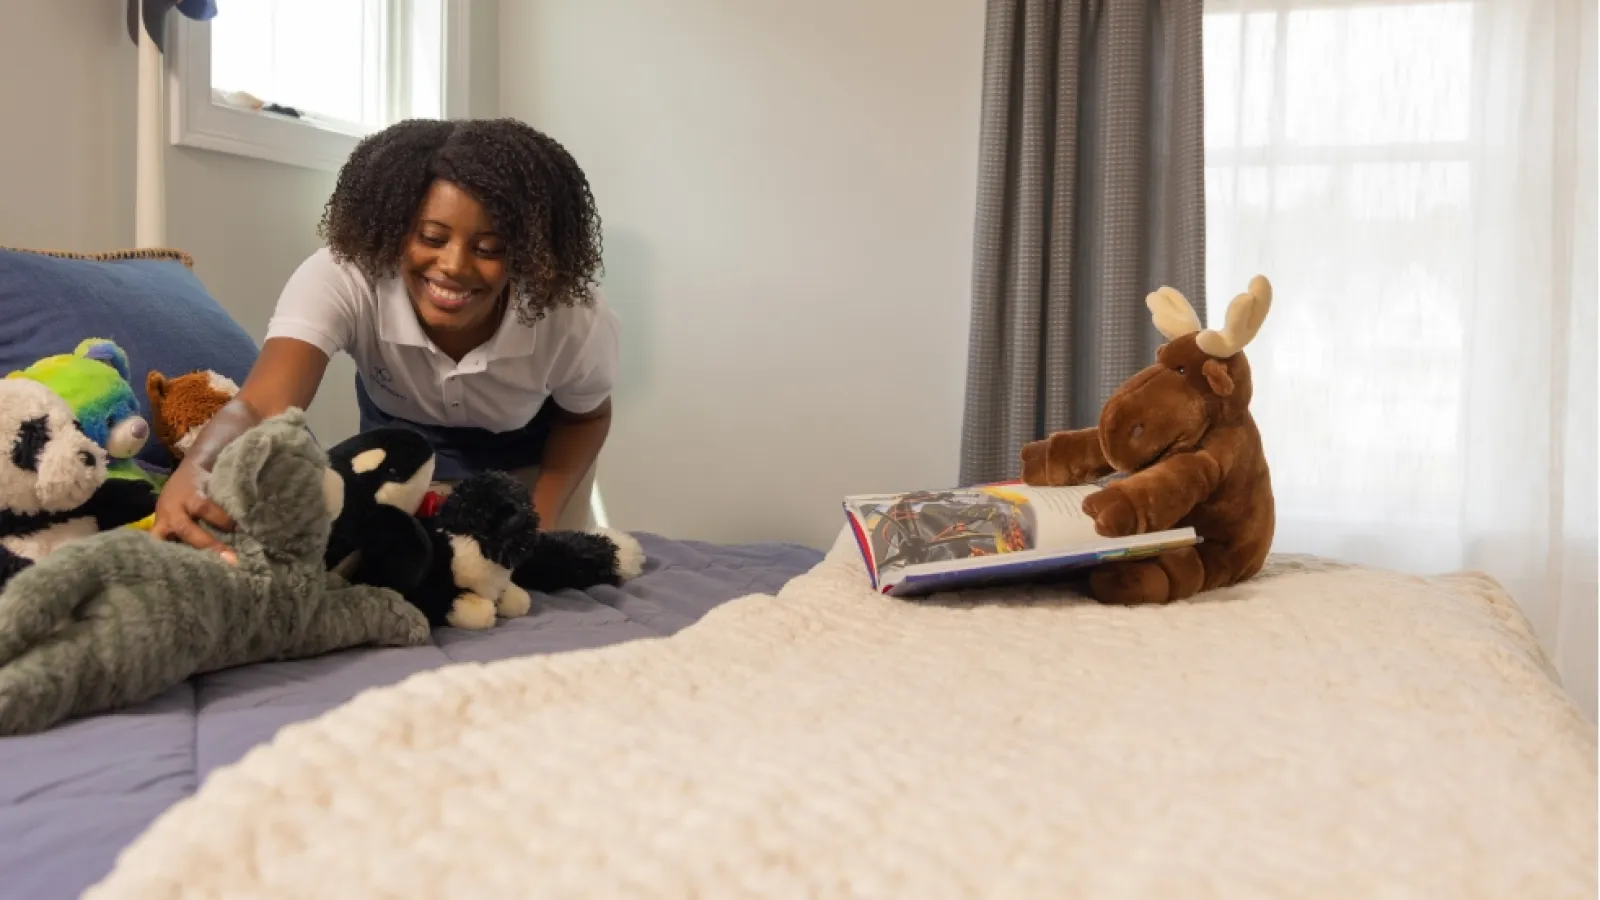 a person reading a book on a bed with stuffed animals